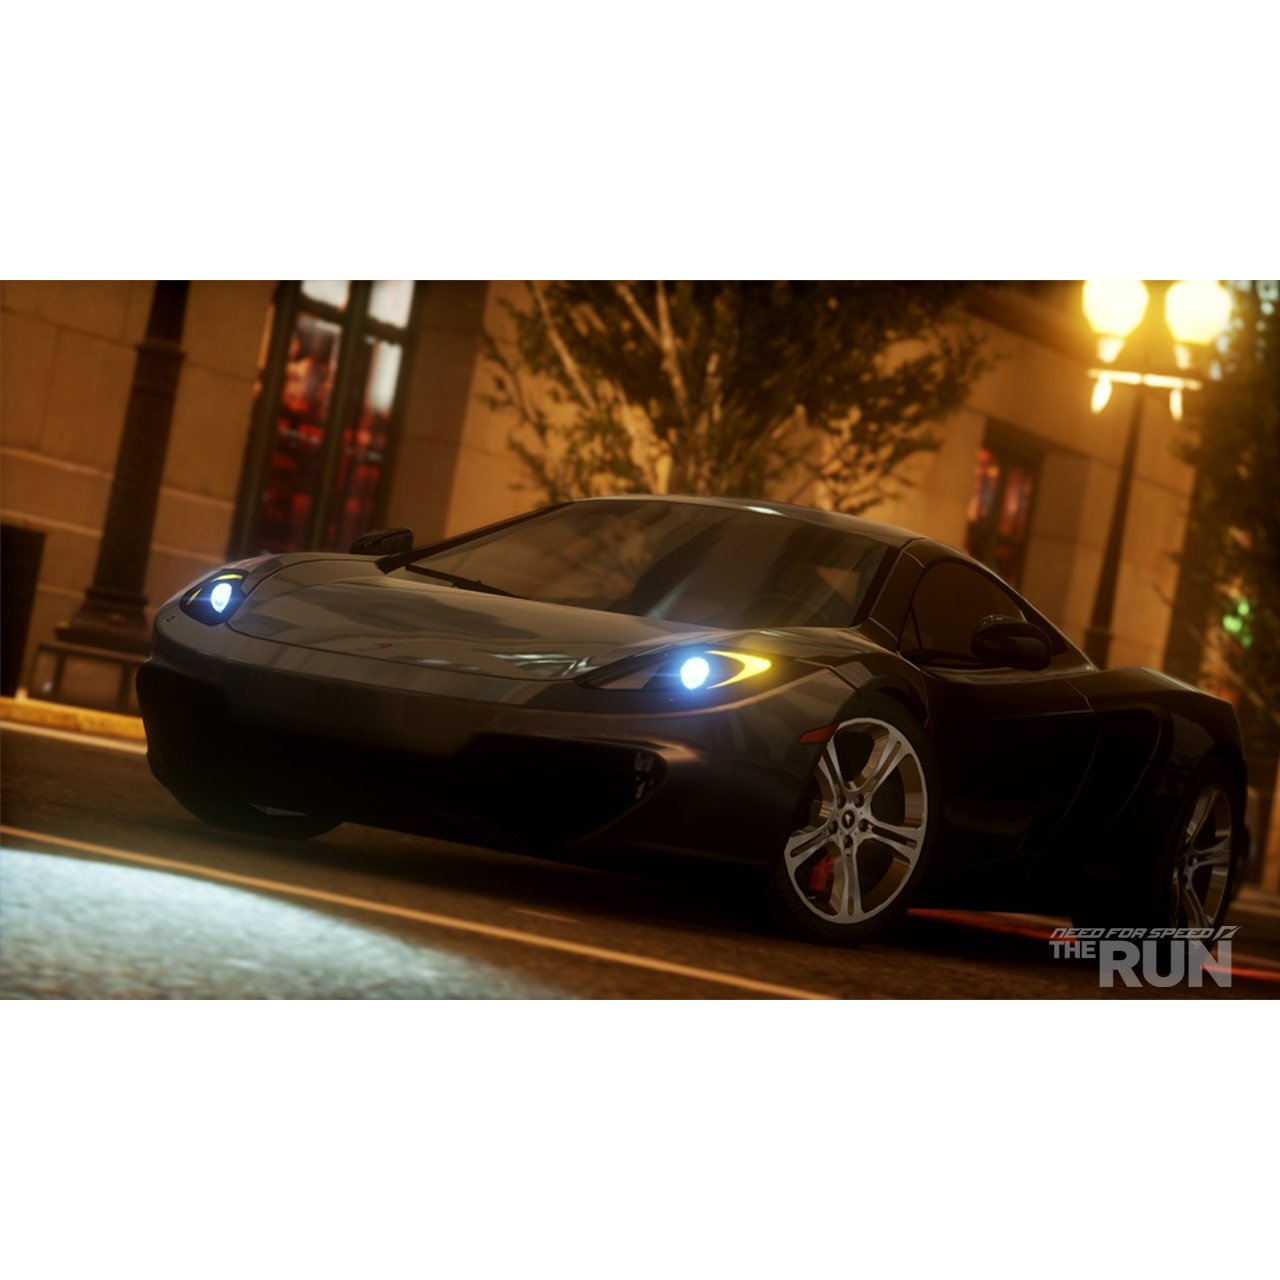 http://thetechjournal.com/wp-content/uploads/images/1109/1316267211-need-for-speed-the-run--game-review-8.jpg